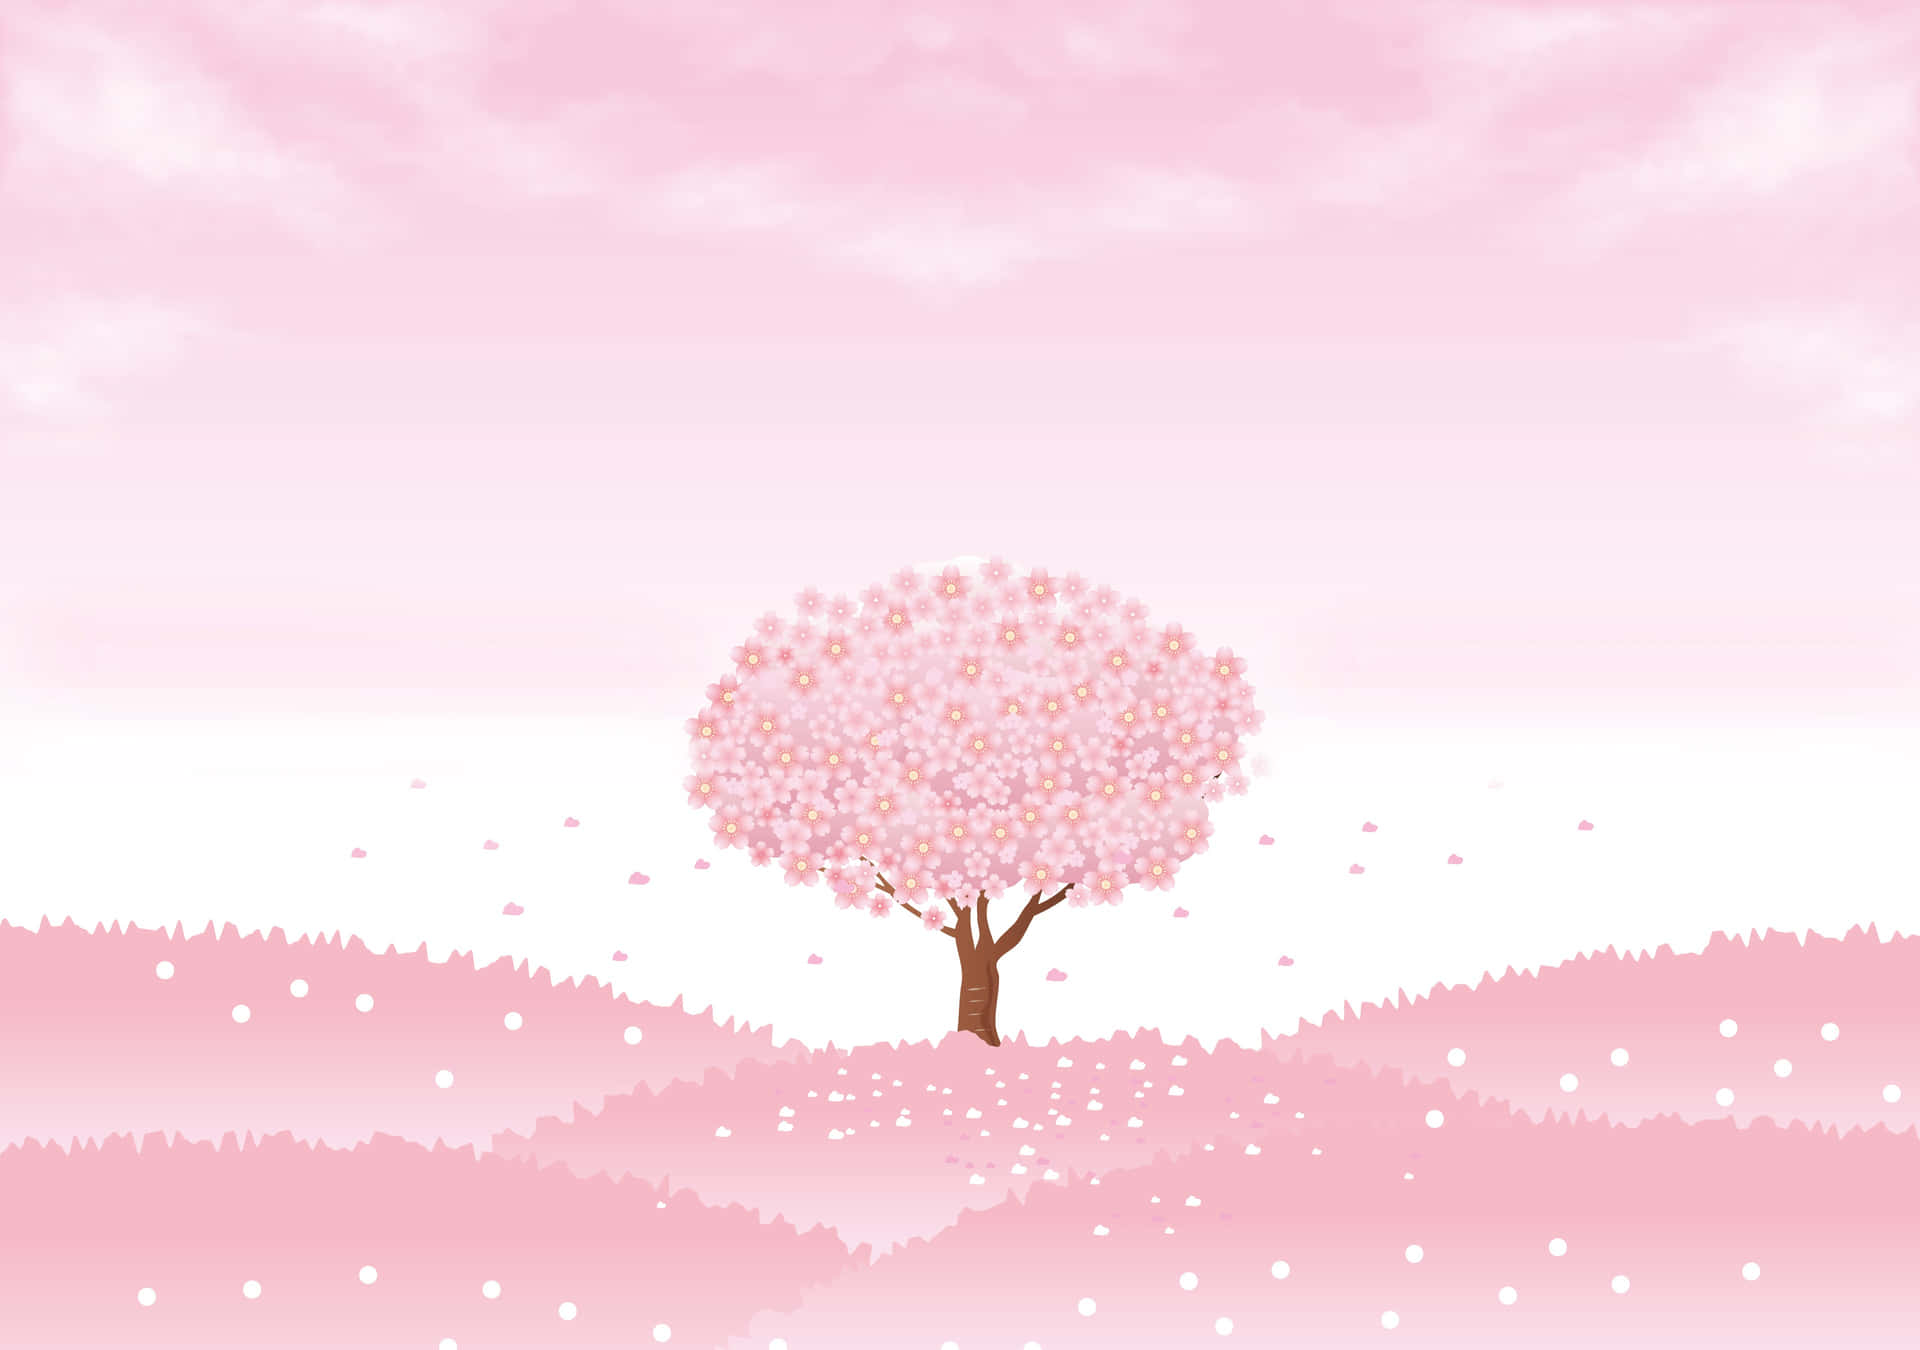 A beautiful Pretty Pink background with white swirls against a pink backdrop